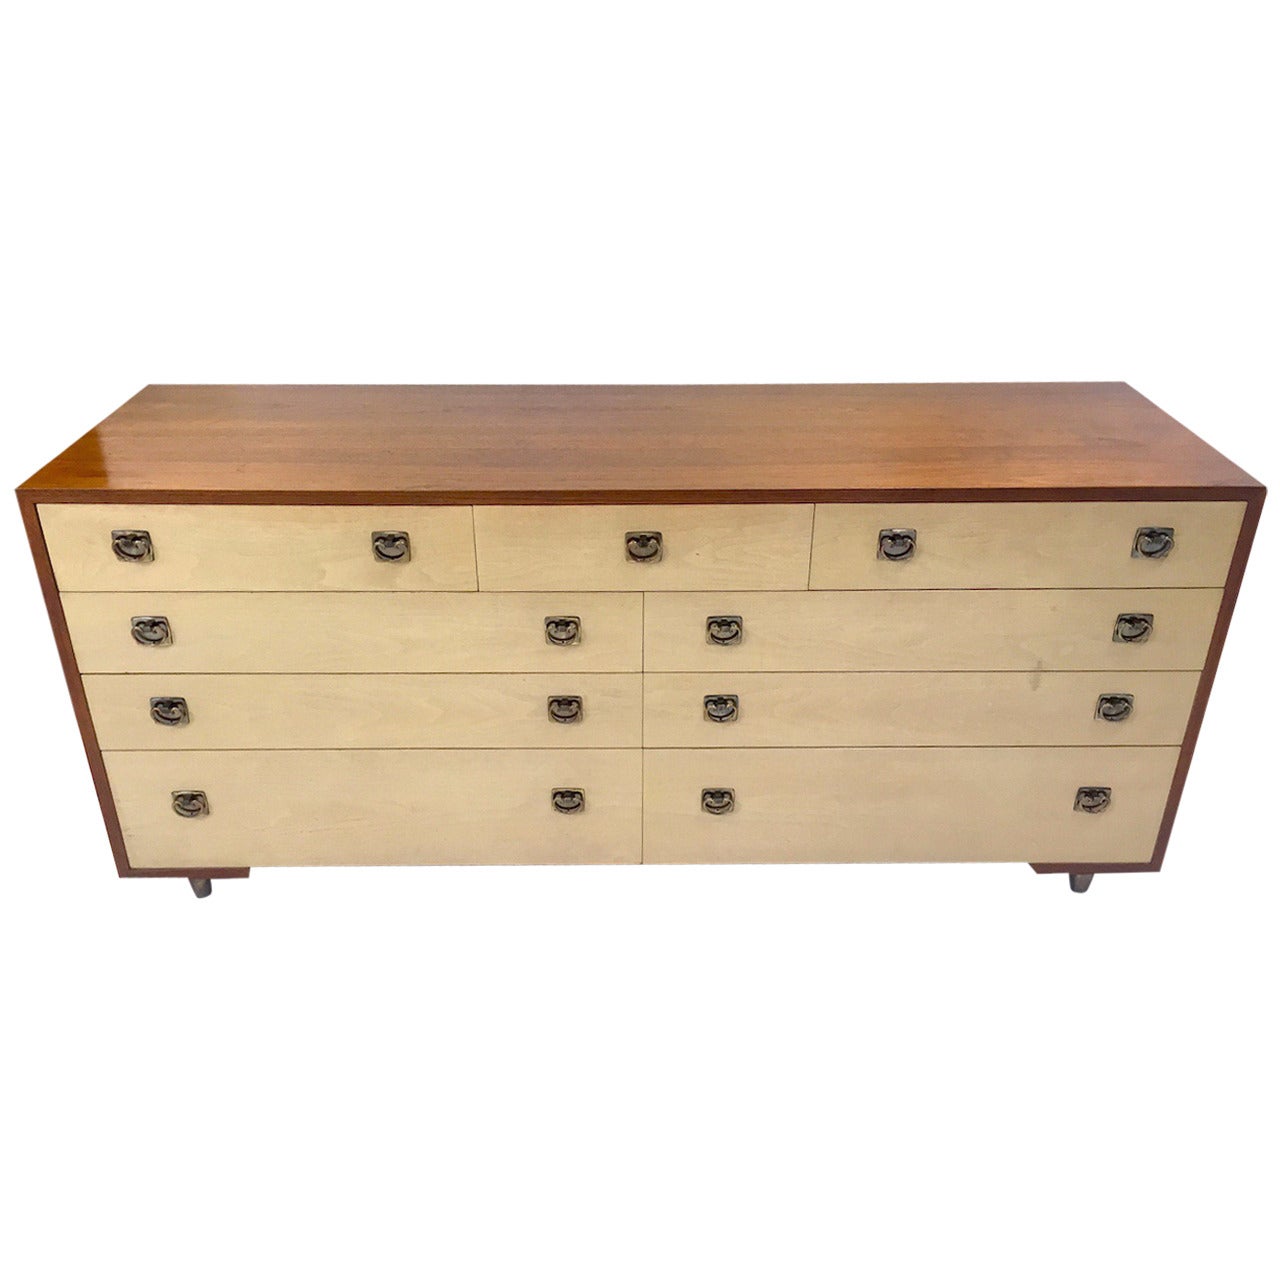 Paul Frankl Dresser Chest of Drawers for Johnson Furniture Company